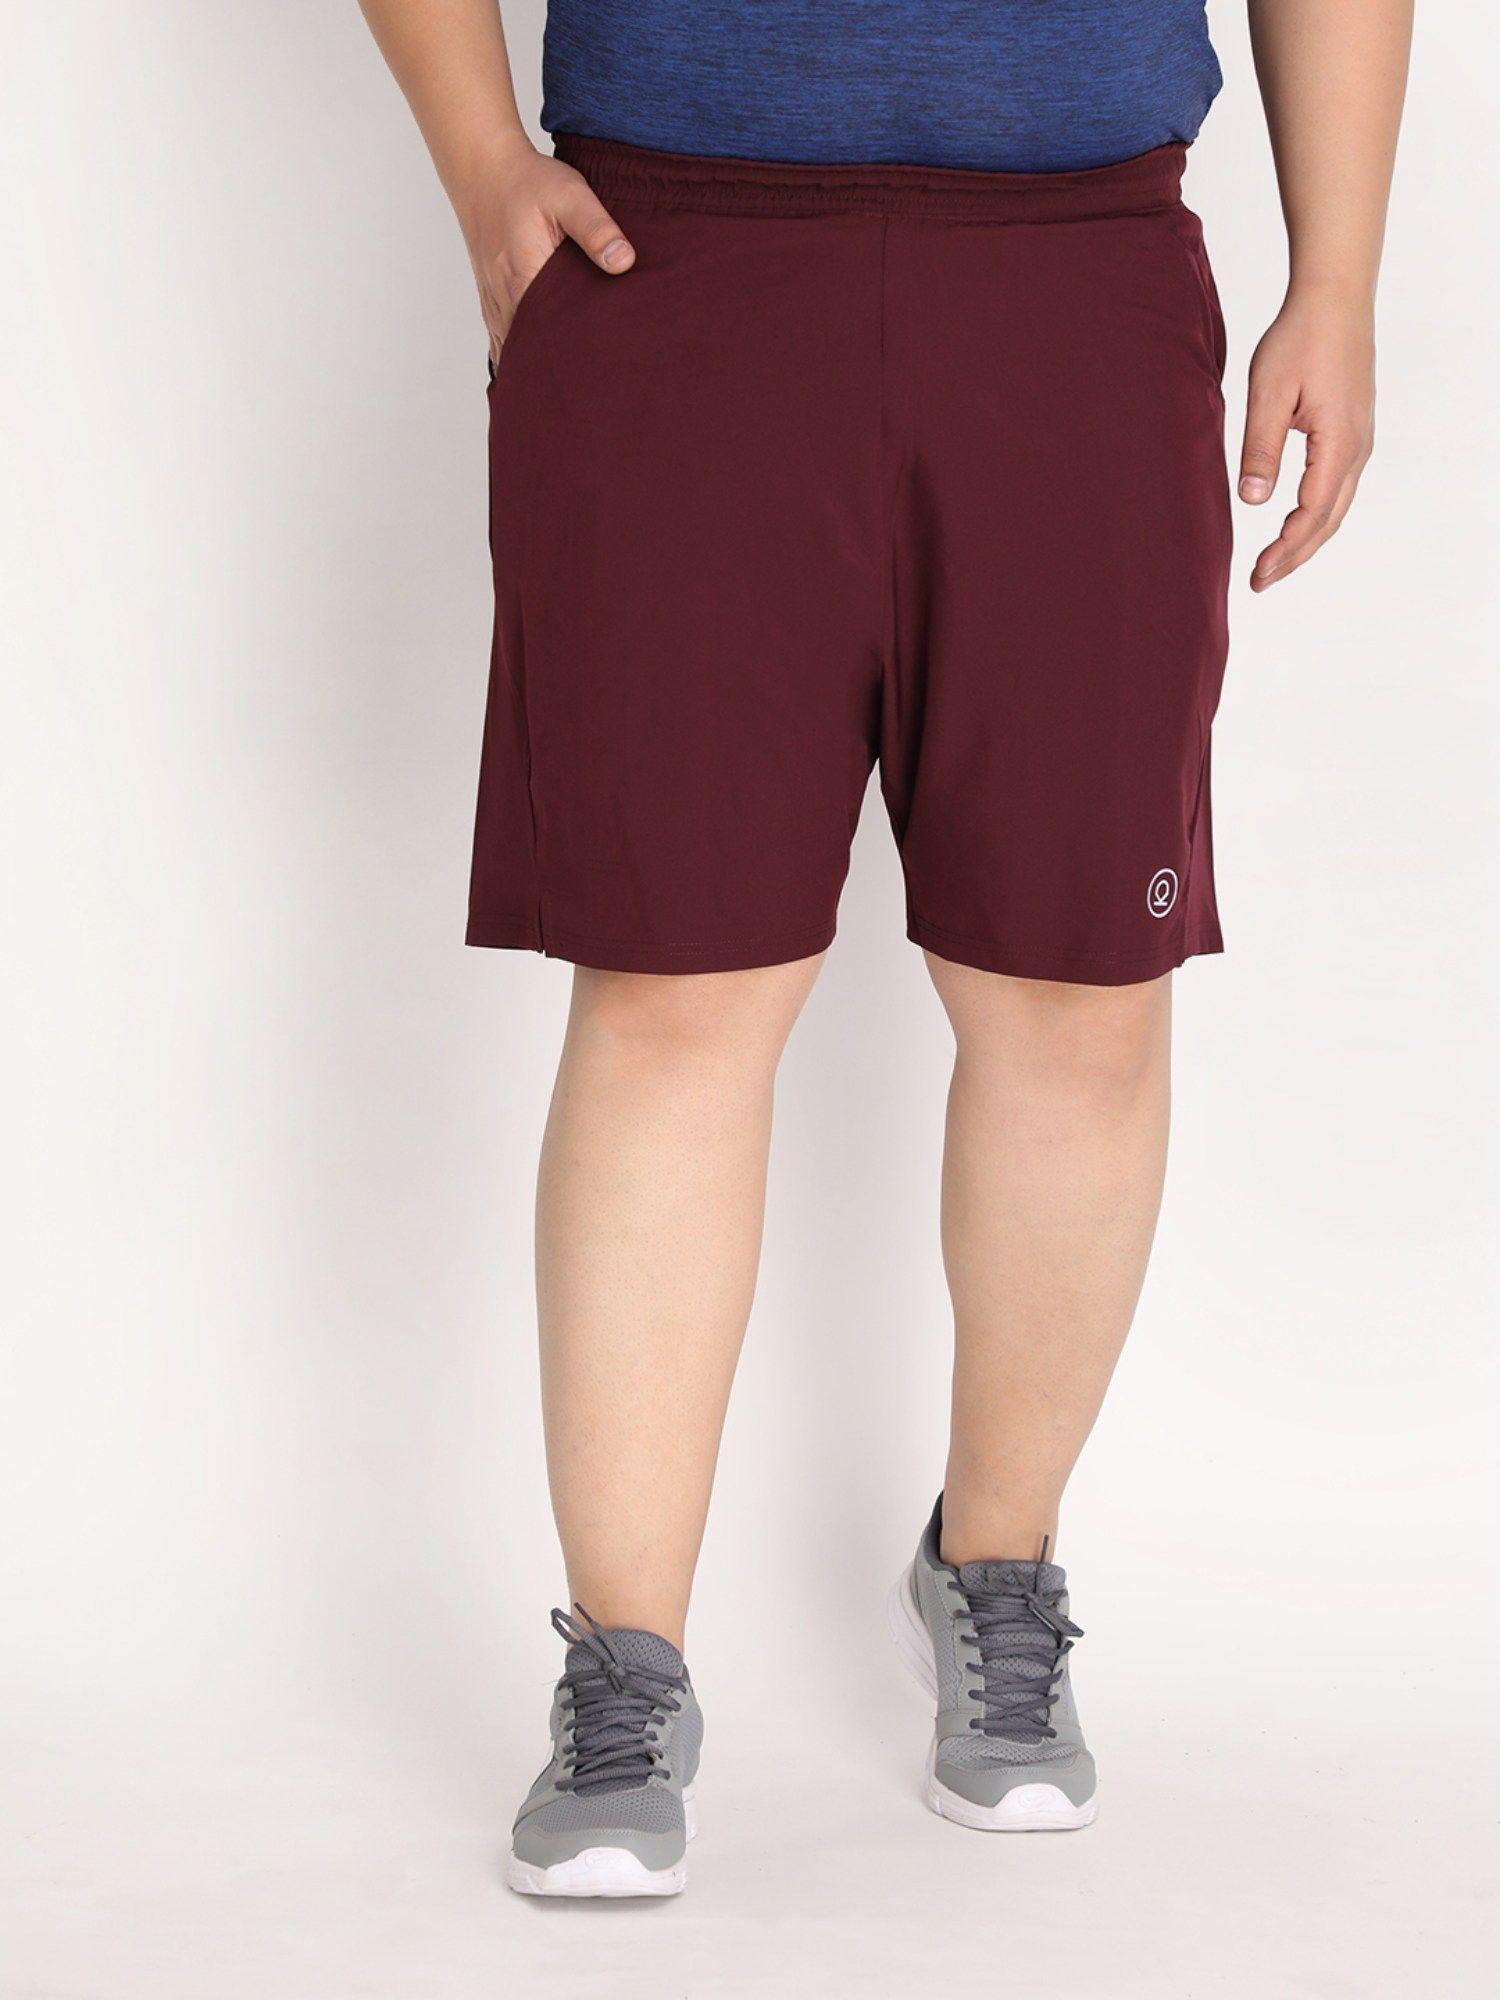 Men Sports Workout Gym Shorts Basketball In Wine